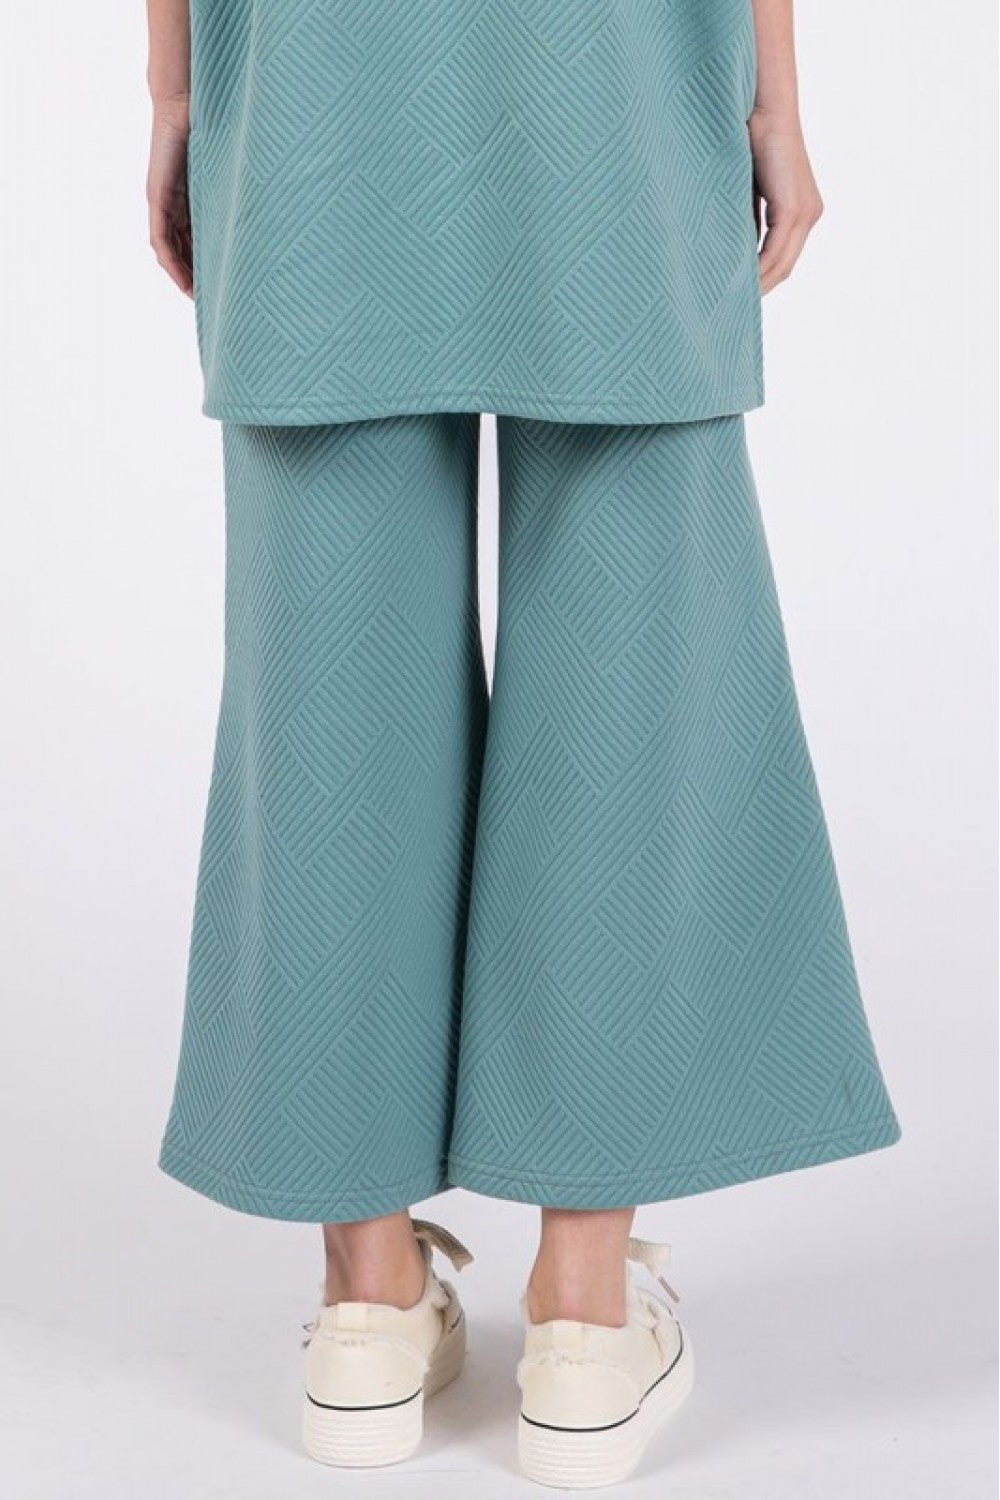 Sage Patterned French Terry Pant Set